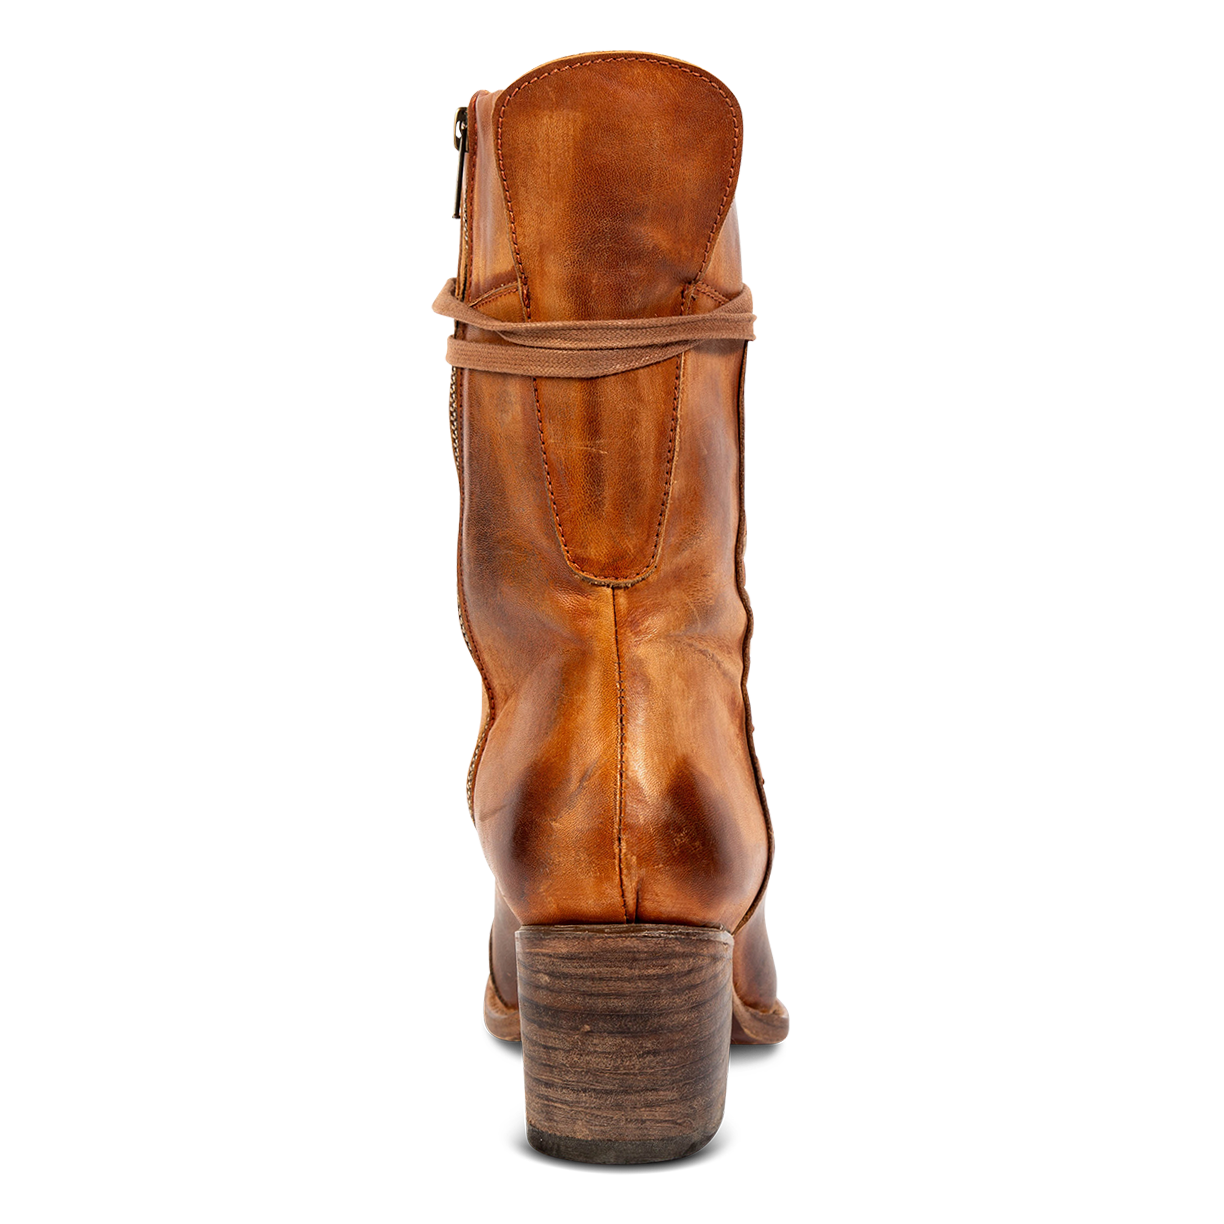 Back view showing stacked heel and working brass inside closure on FREEBIRD women's Dart whiskey leather boot